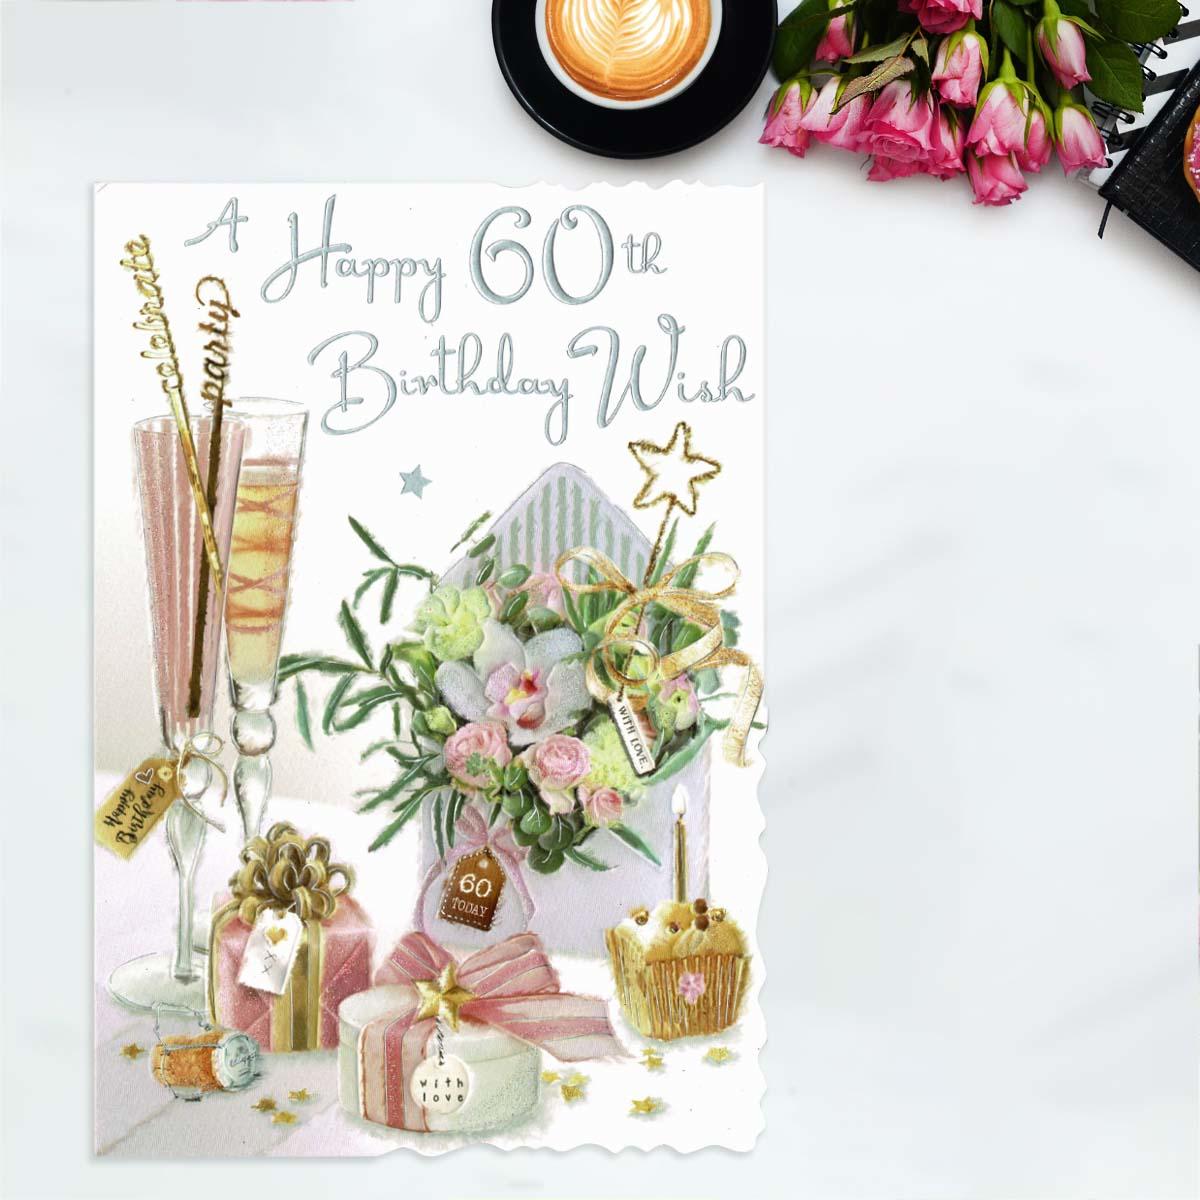 A Happy 60th Birthday Wish Card Front Image